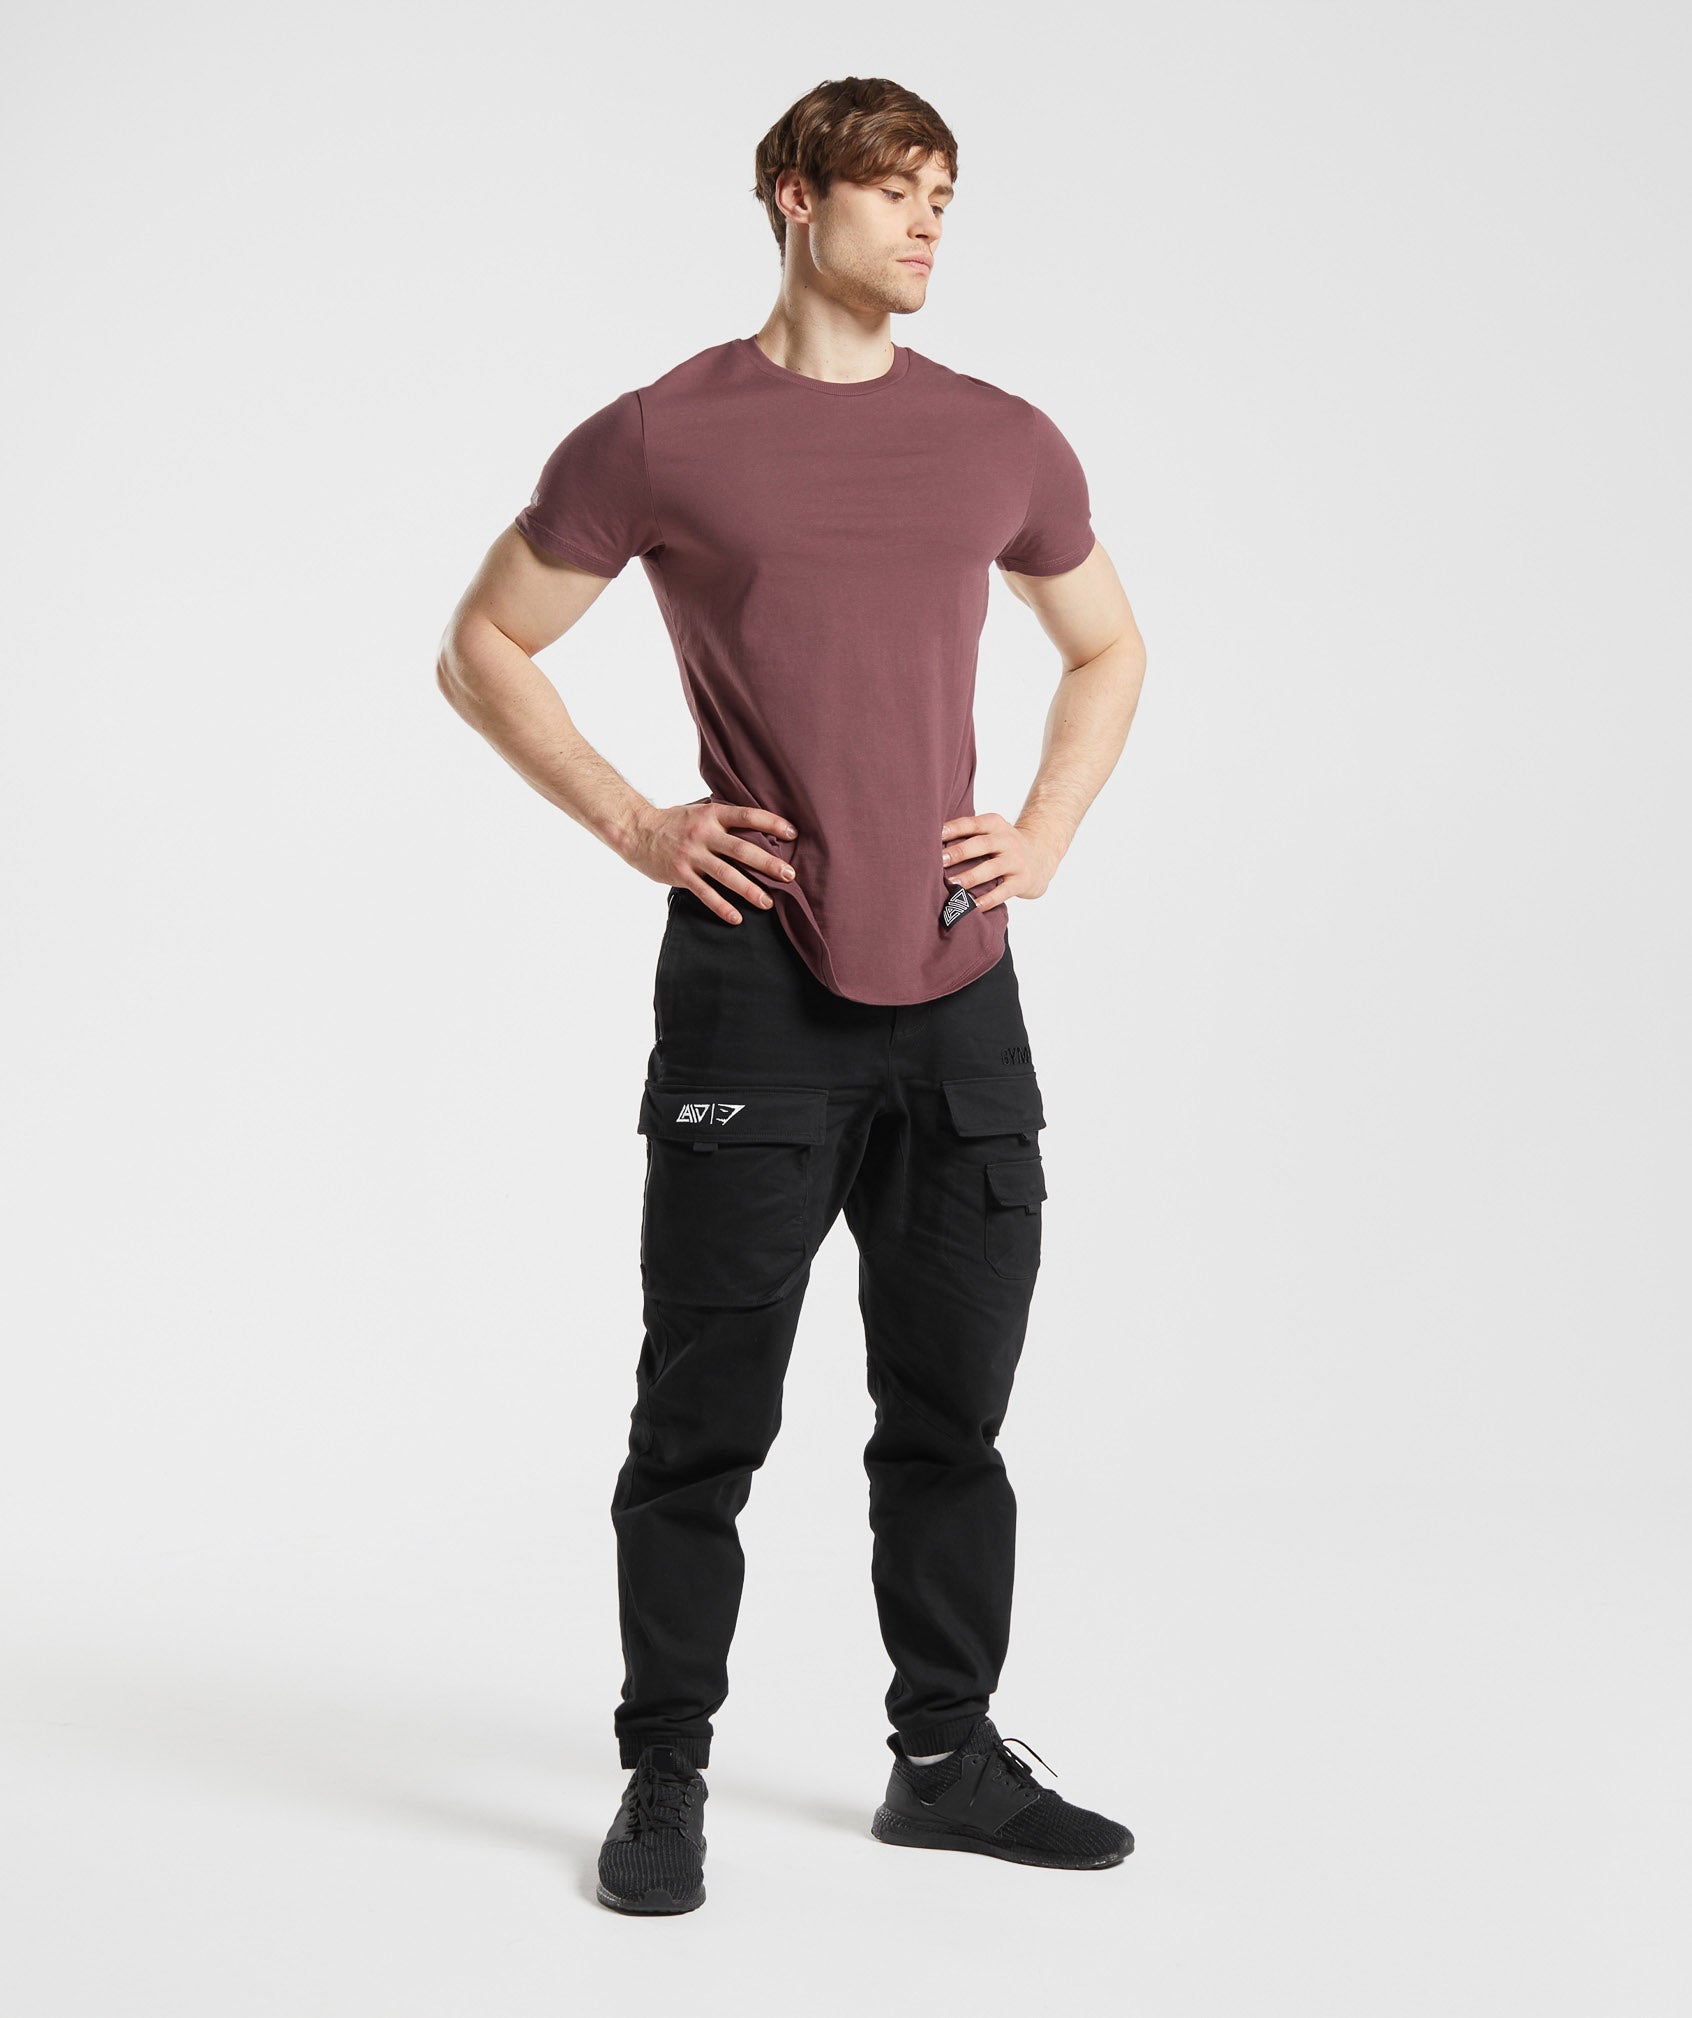 Gymshark on X: Do it with Eaze. David Laid effortlessly styling